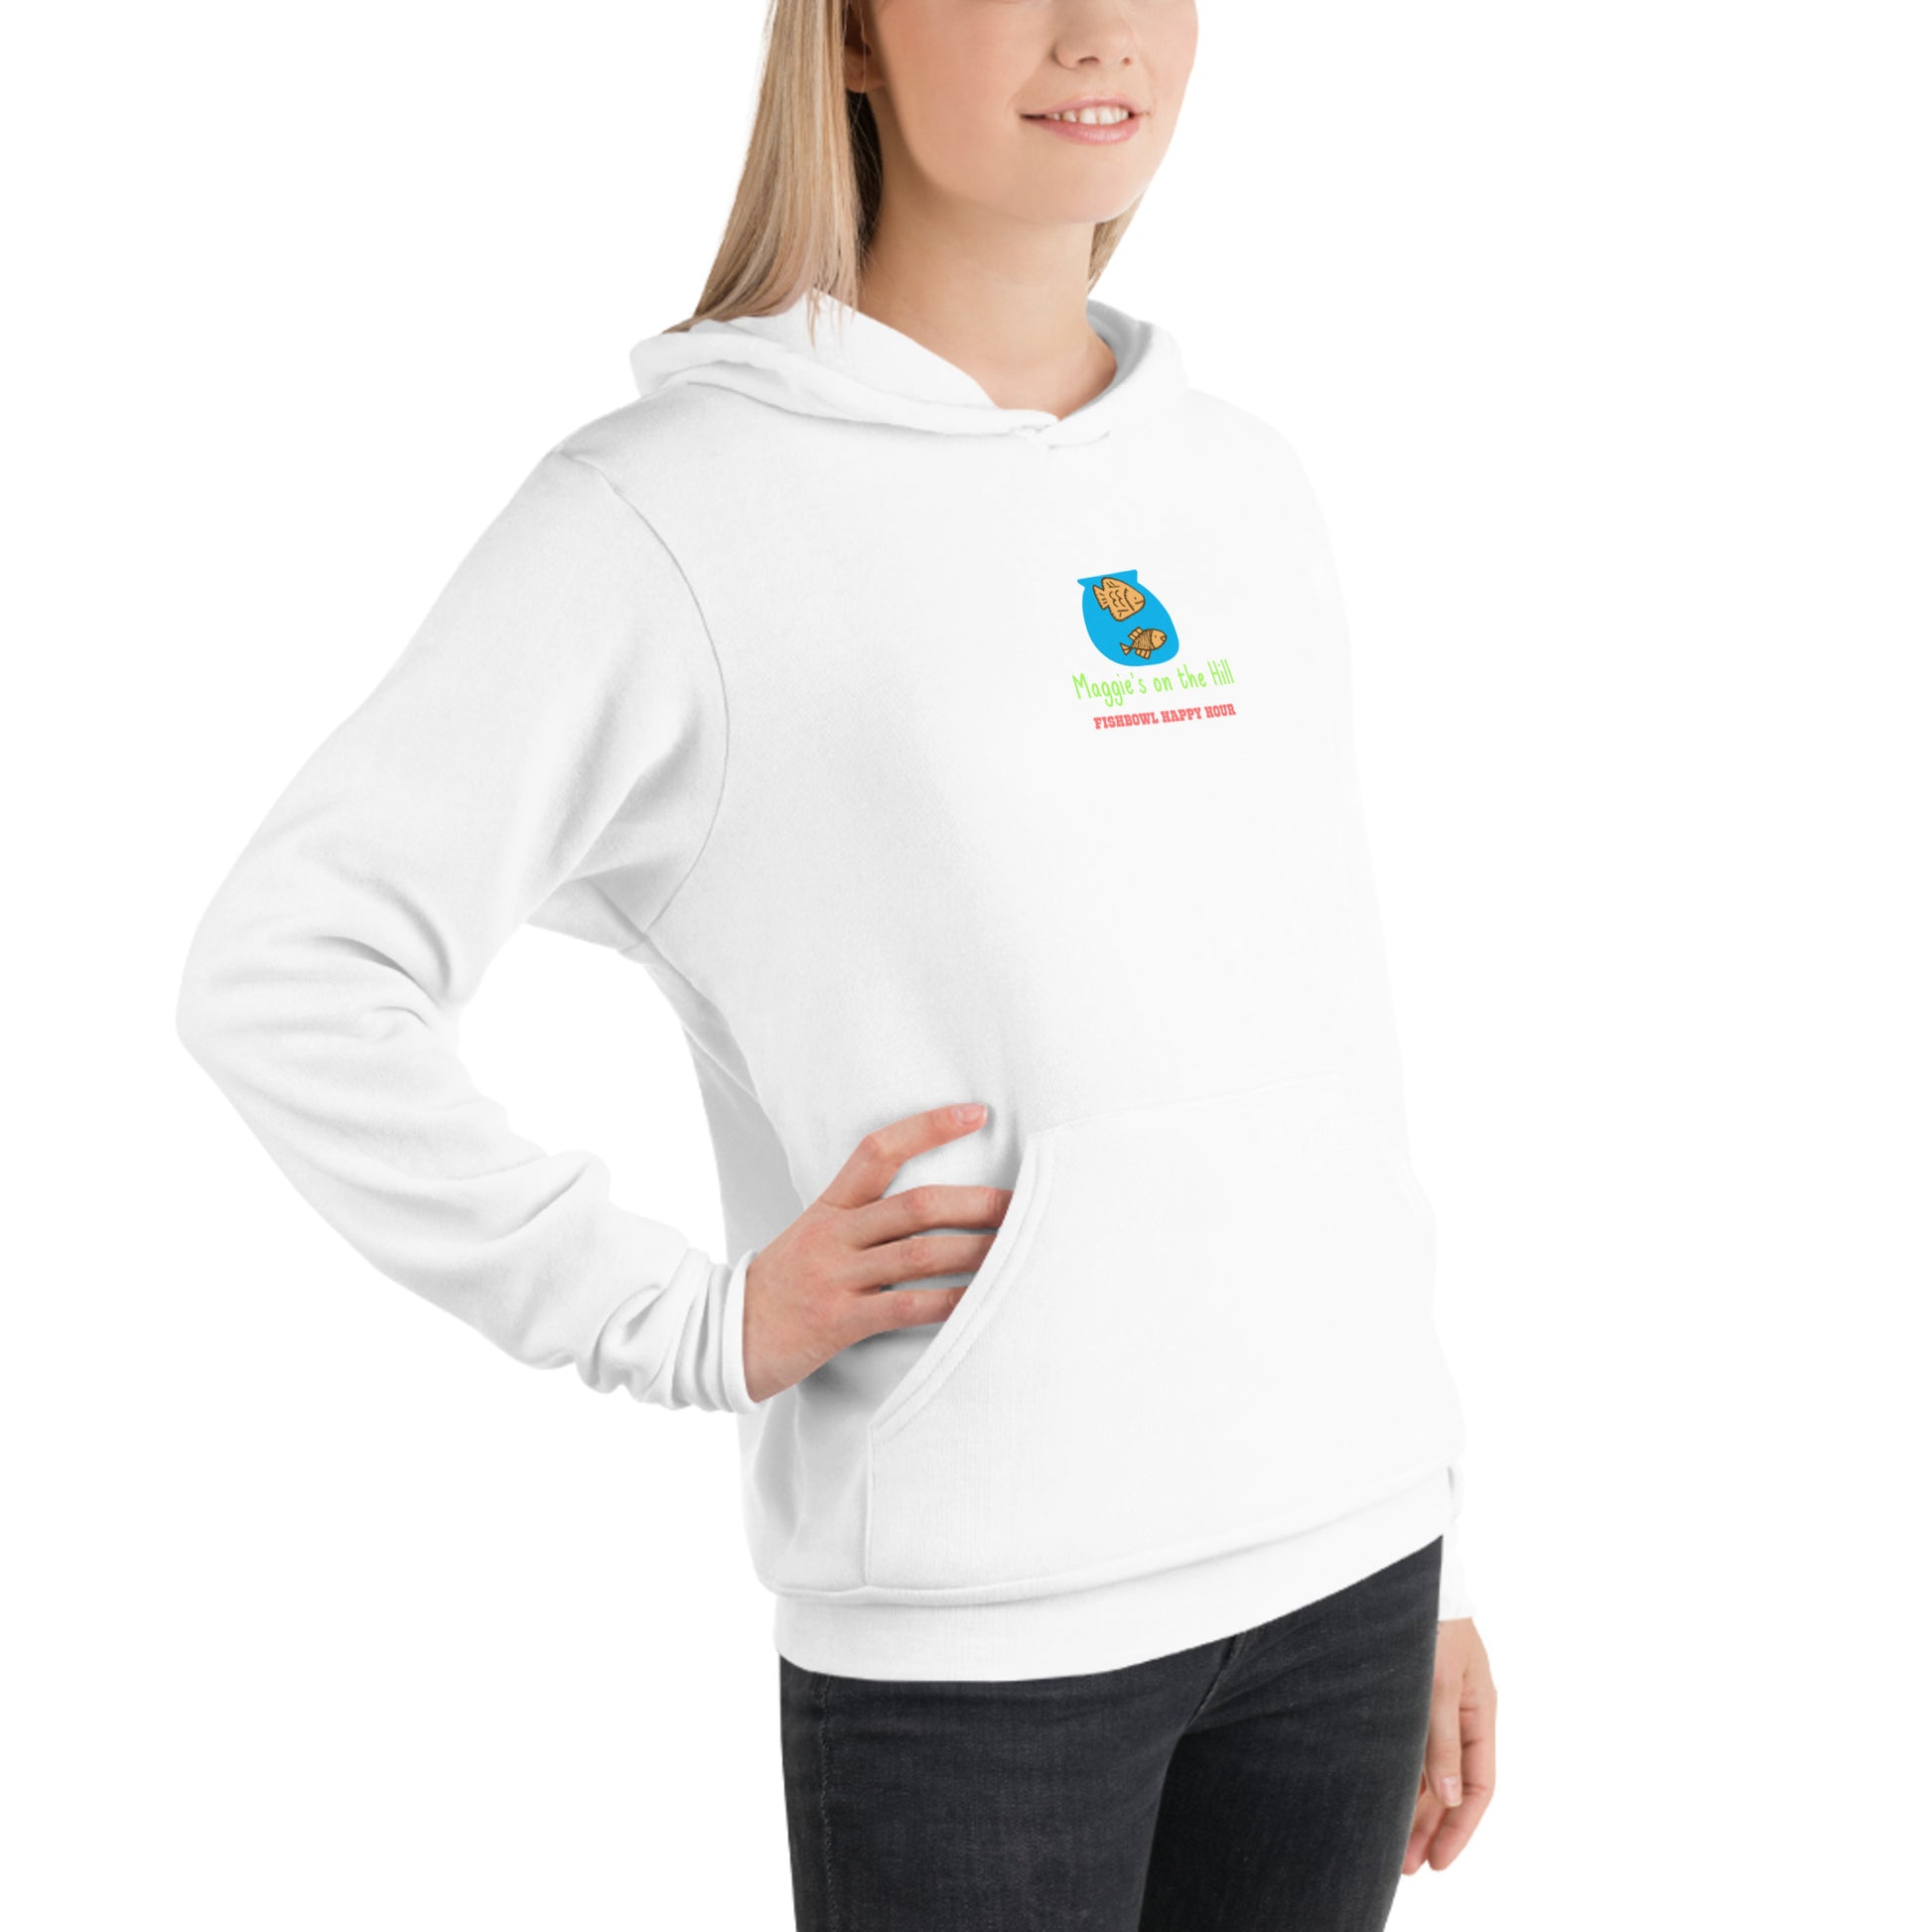 Maggie's on the Hill - A famous college bar's white sweatshirt warm hoodie celebrating the college bar tradition of a "Fishbowl Happy Hour"